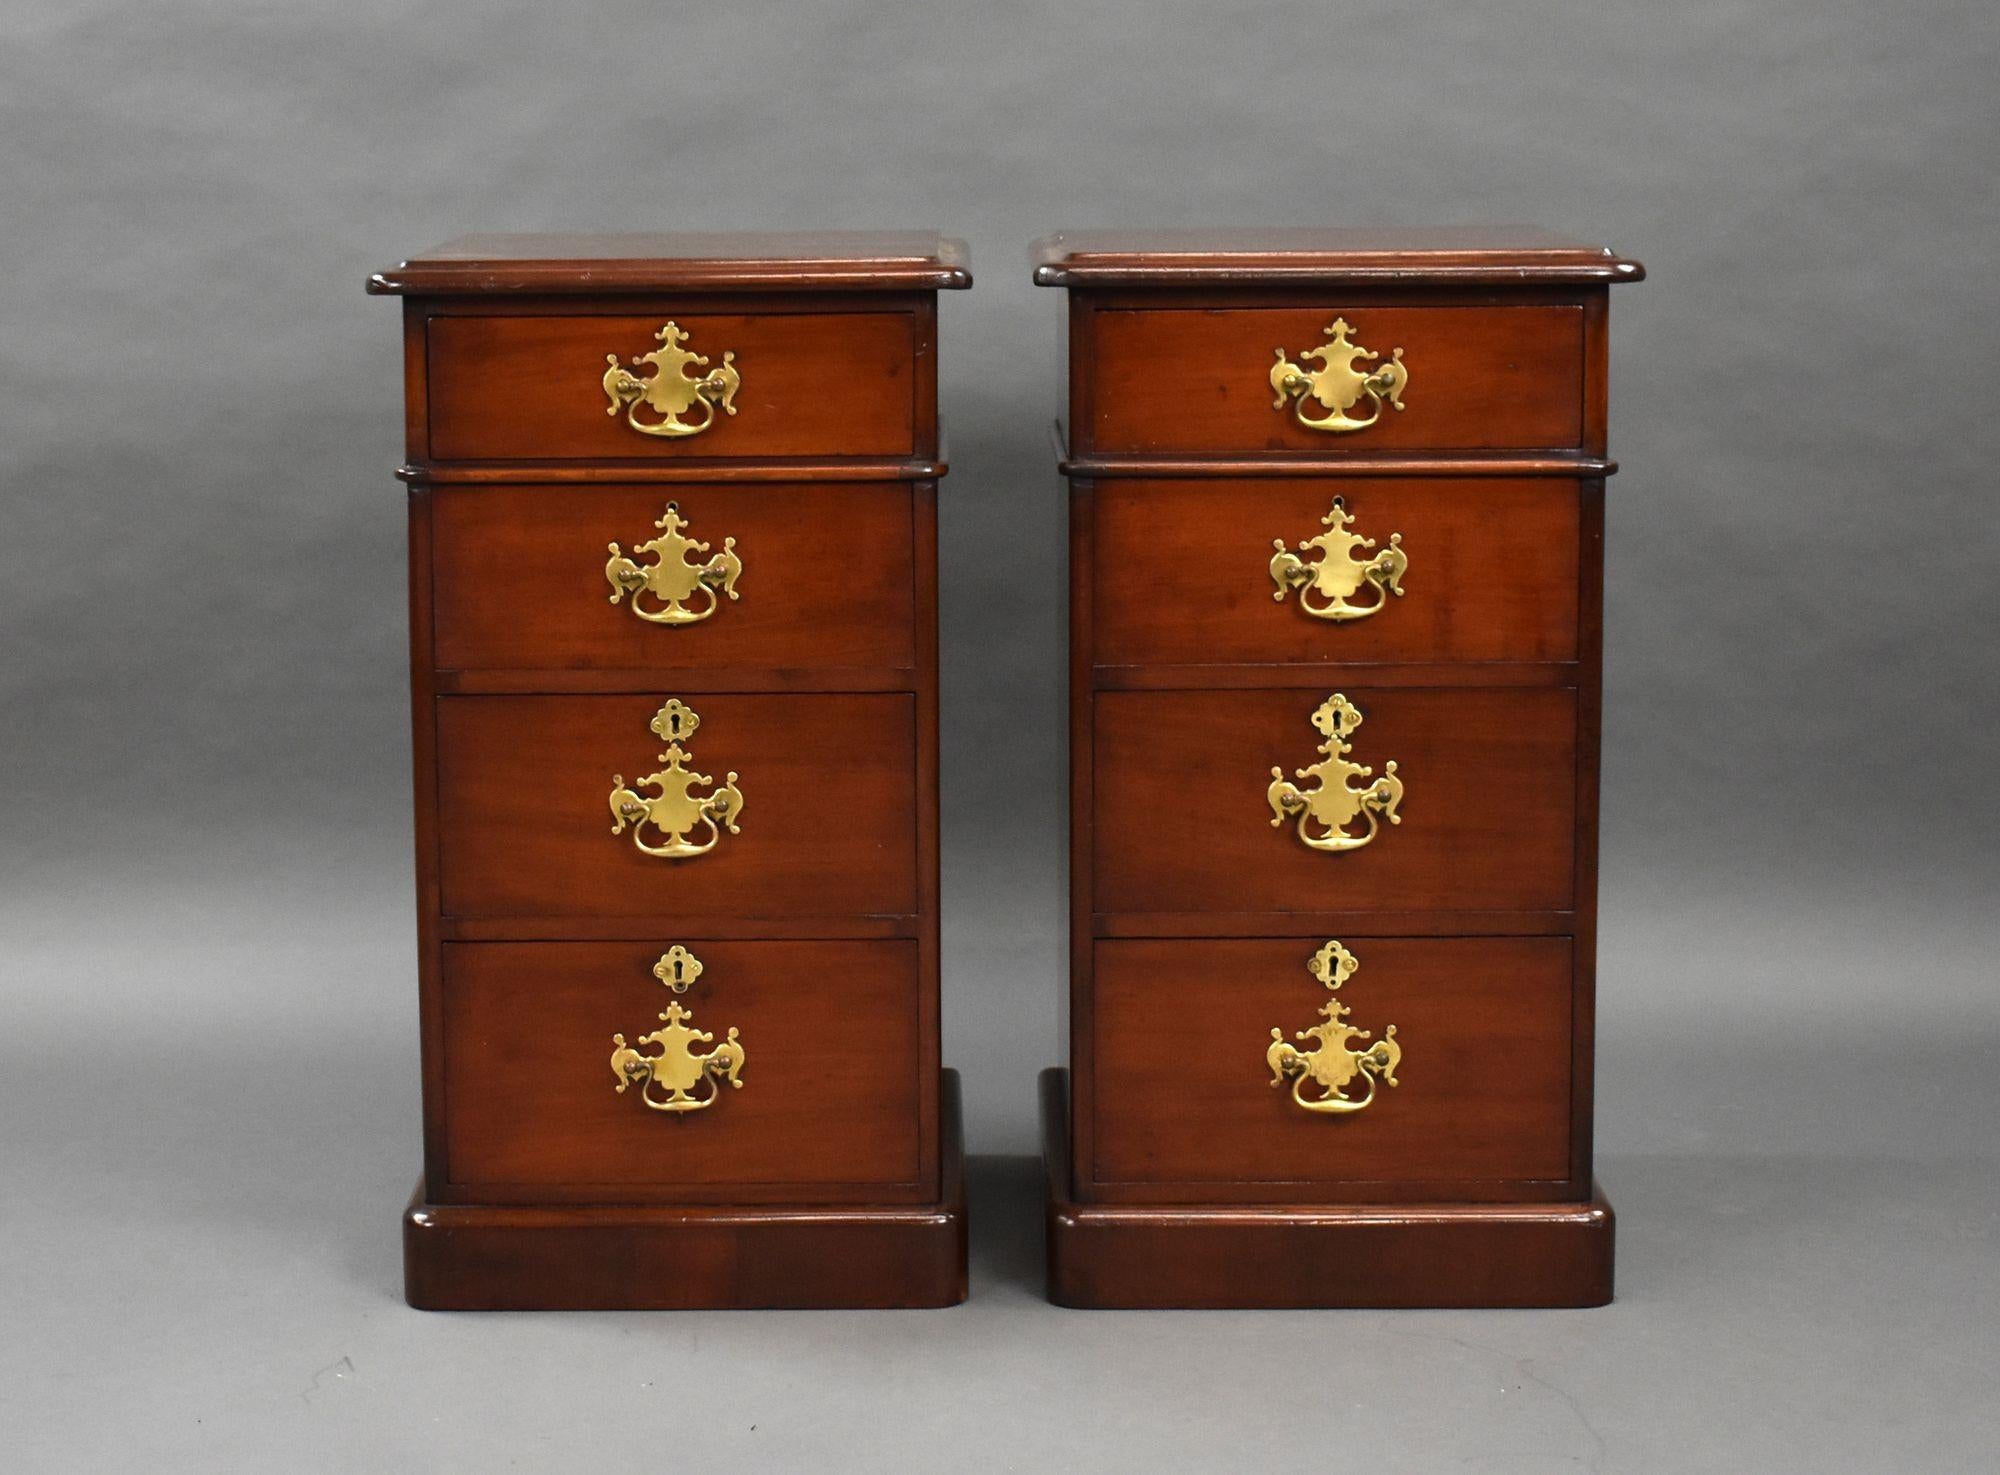 For sale is a good quality pair of Victorian mahogany bedside chests, having an arrangement of four graduated drawers, each with brass handles, raised on a plinth base. Both chests remain in excellent condition.
Width: 41cm Depth: 41cm Height: 74cm